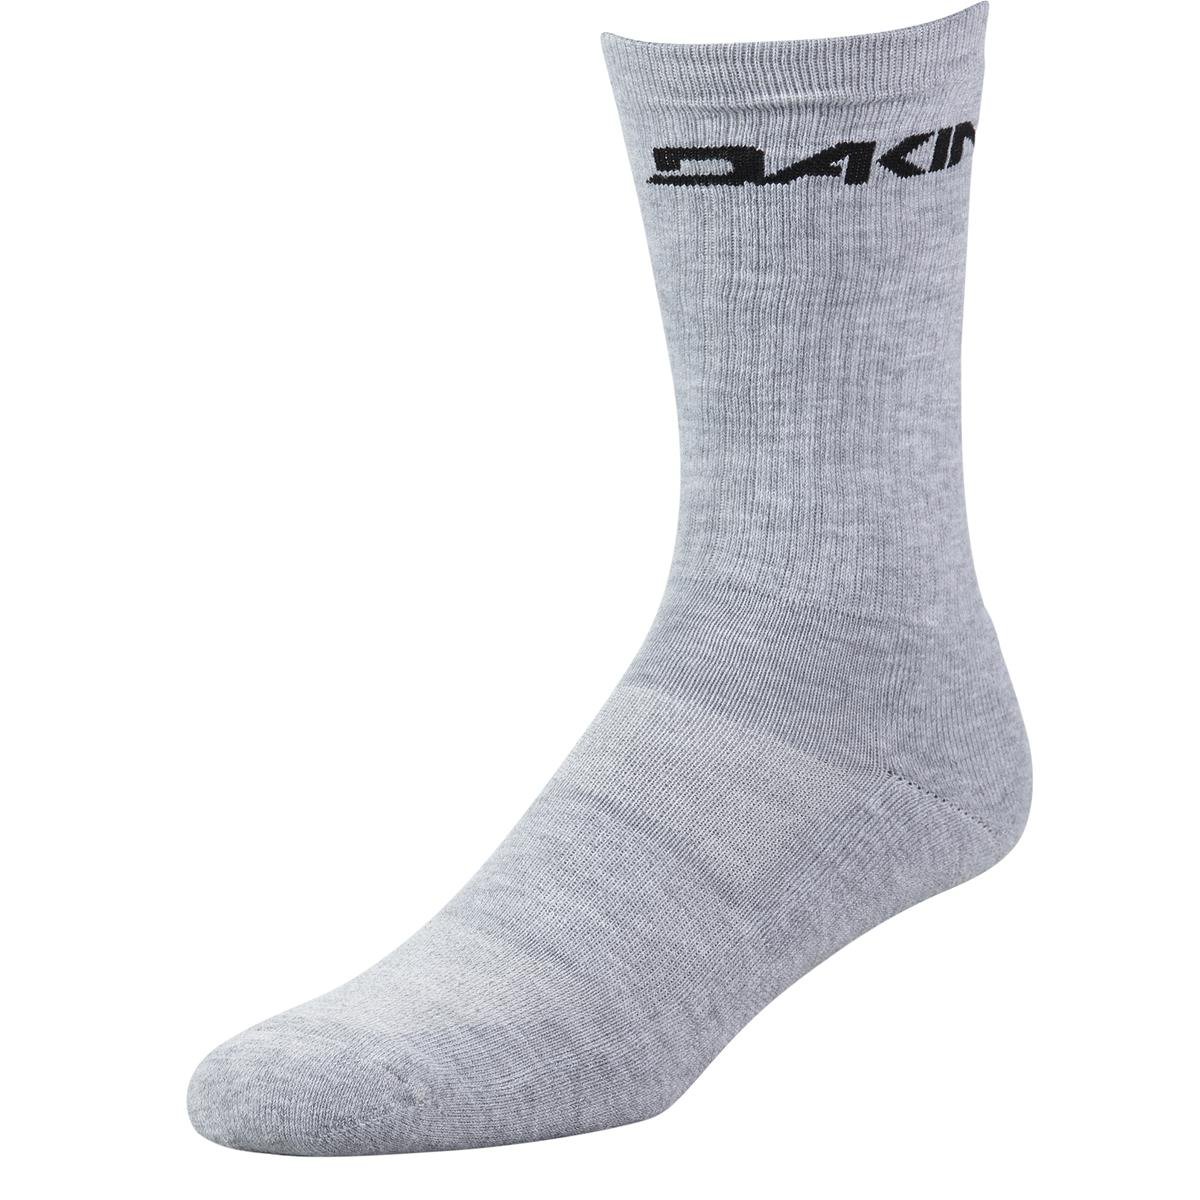 Dakine Chausettes Essential Gris Heather, 3 Pack